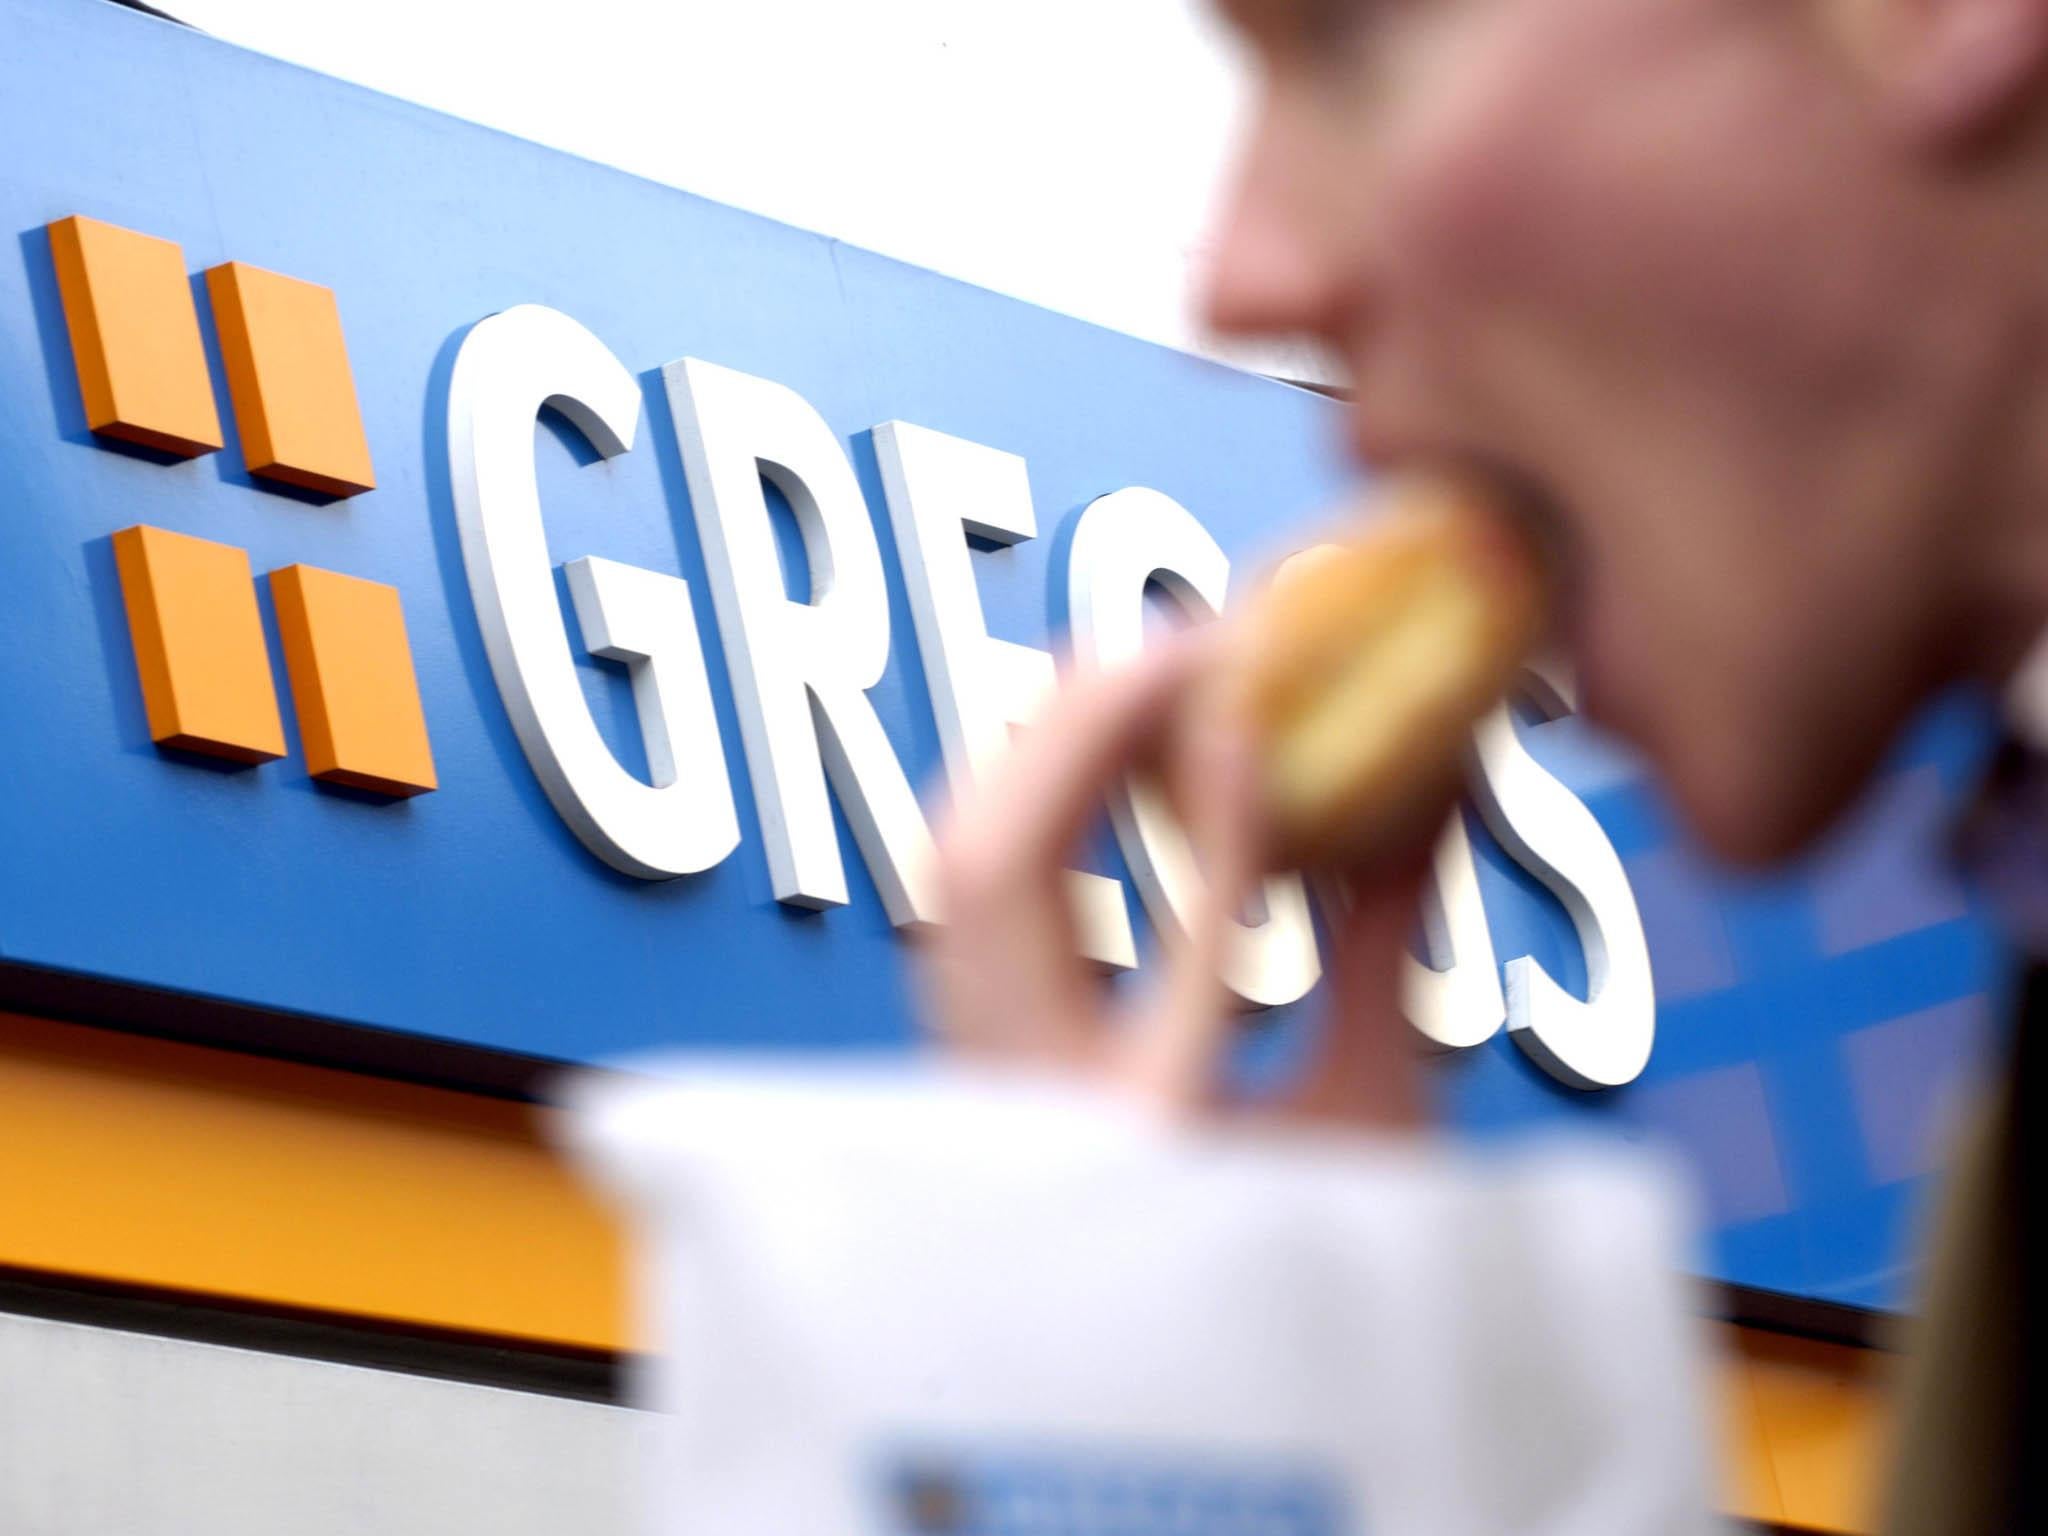 Greggs ended the year with 1,854 outlets